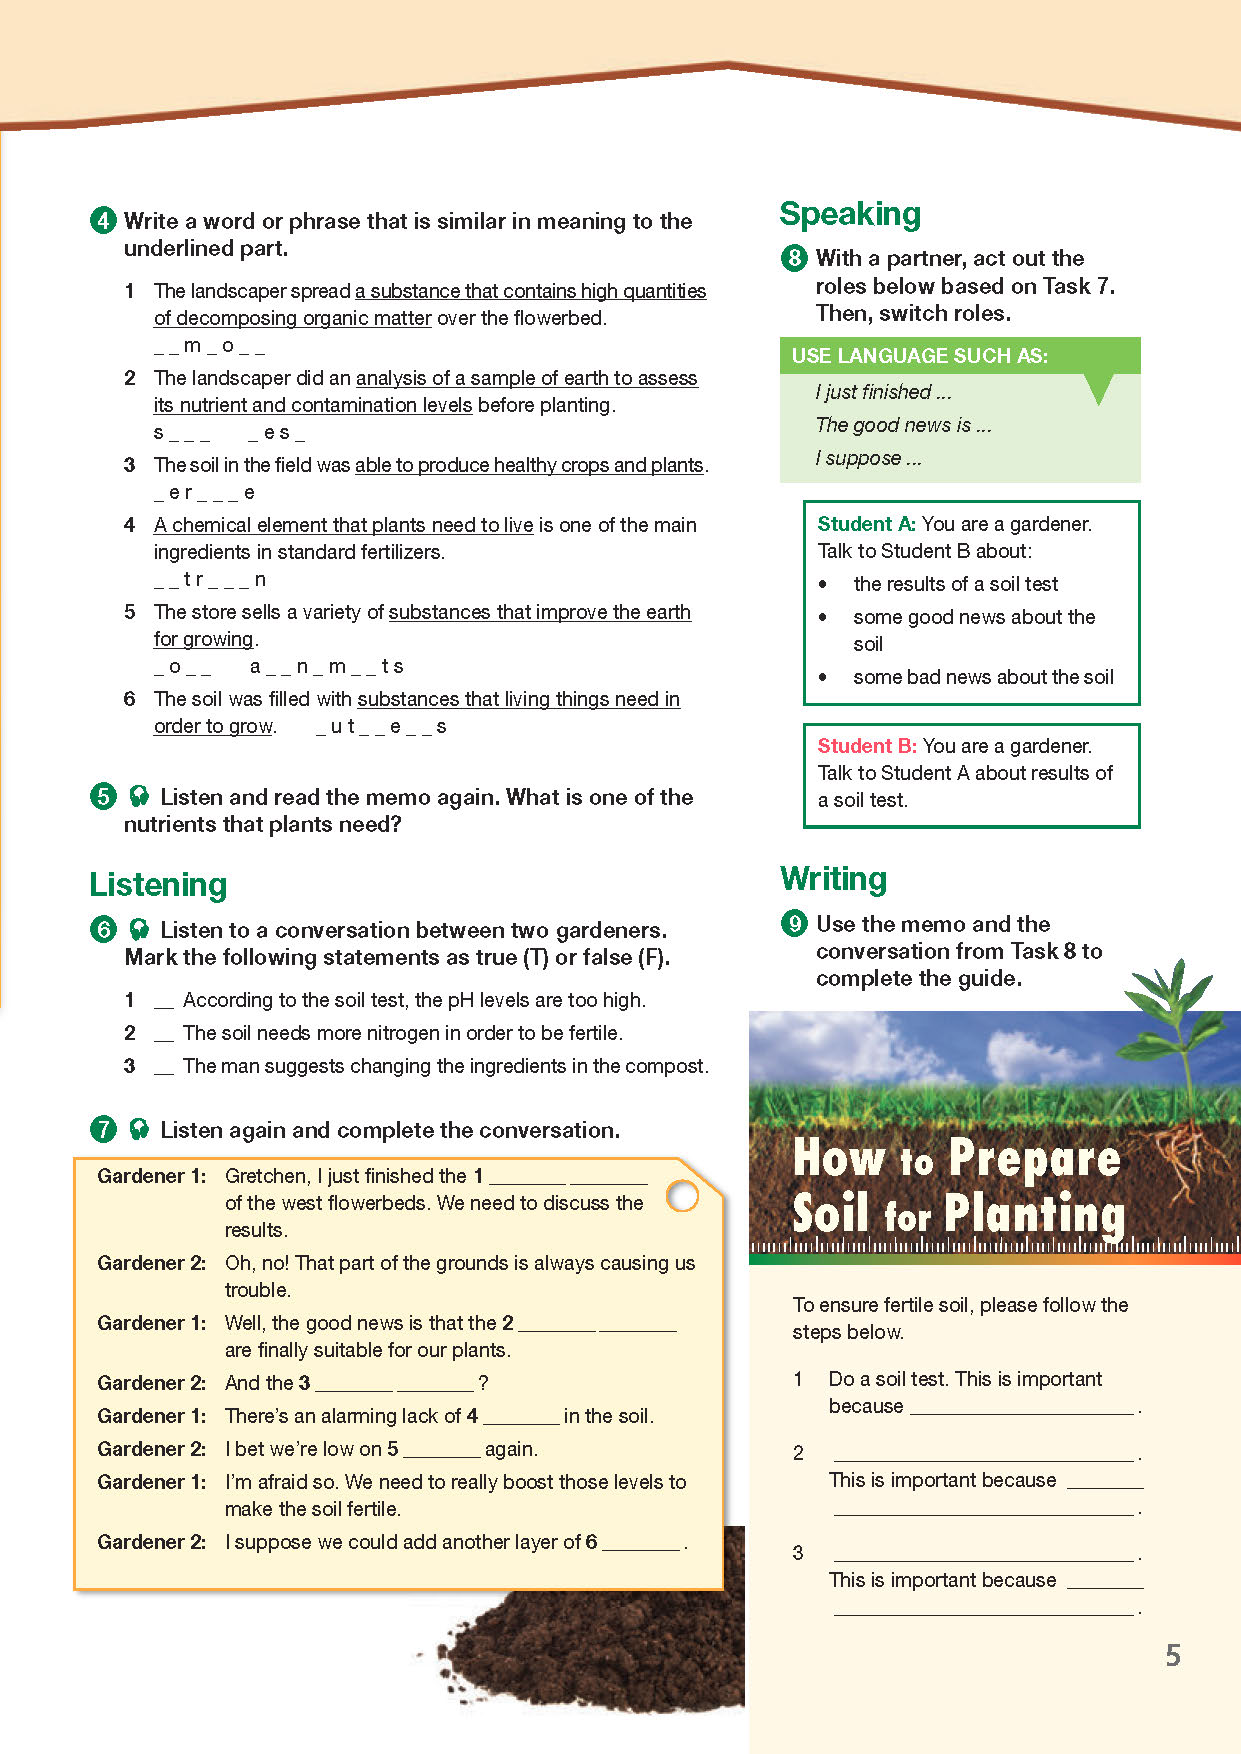 ESP English for Specific Purposes - Career Paths: Landscaping - Sample Page 2